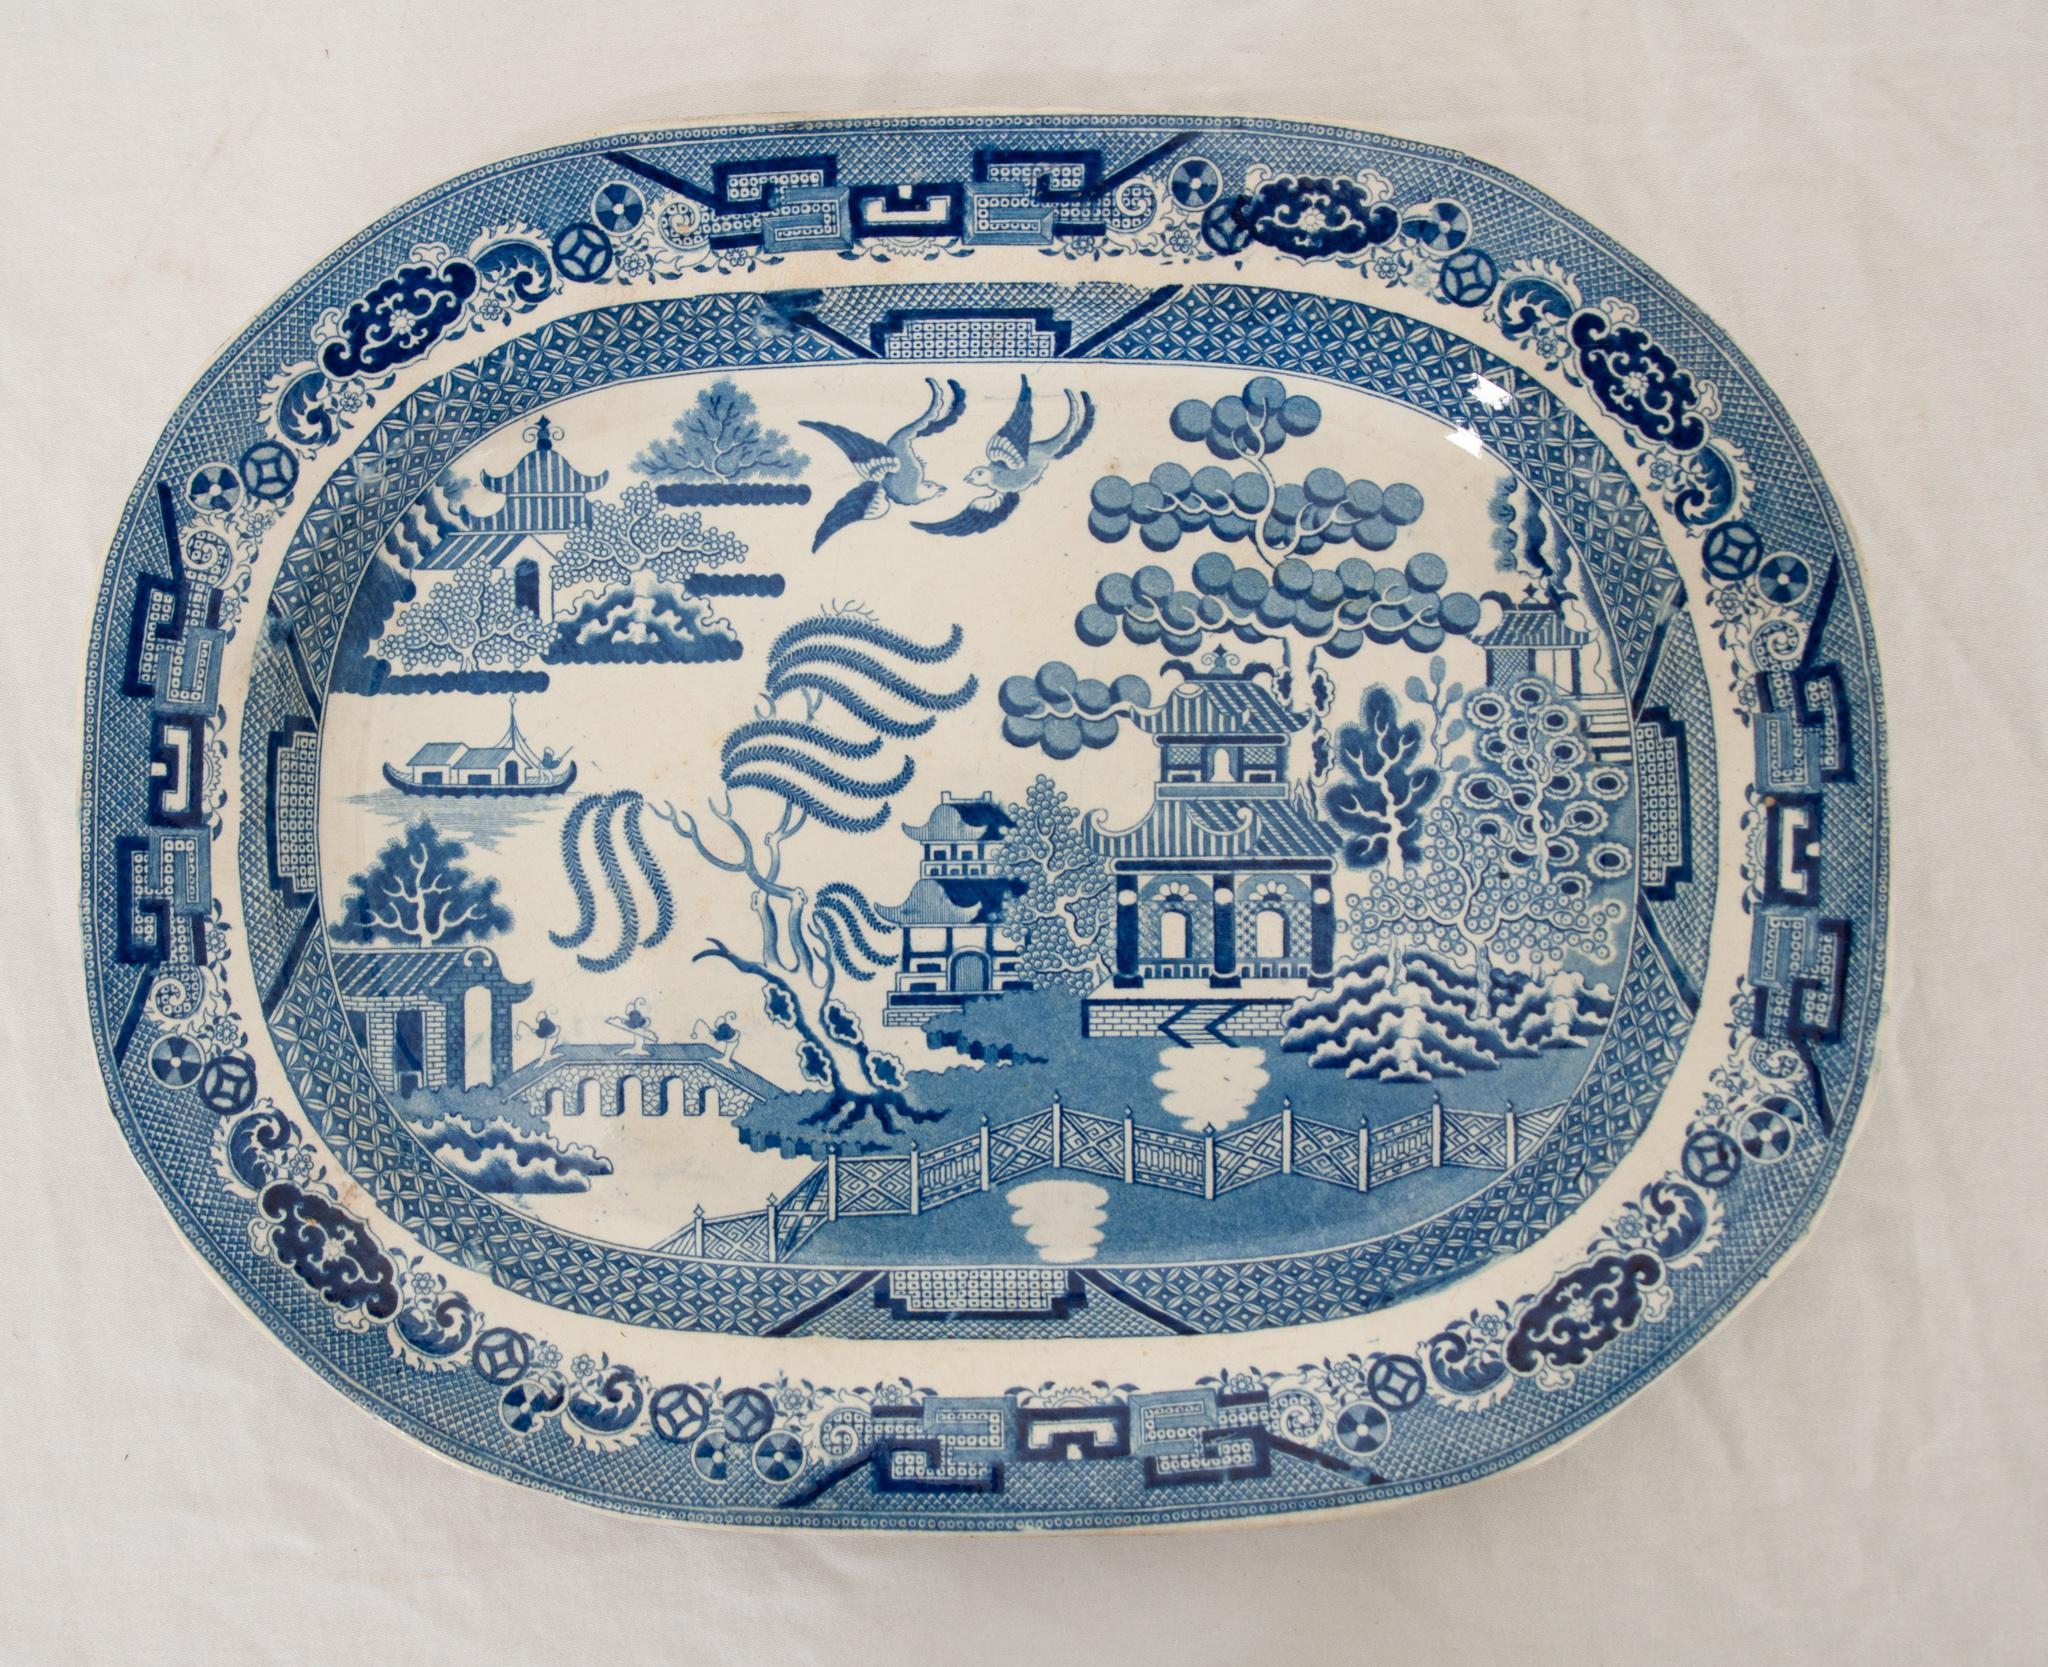 A superb 19th century transferware ironstone platter from England in the classic 